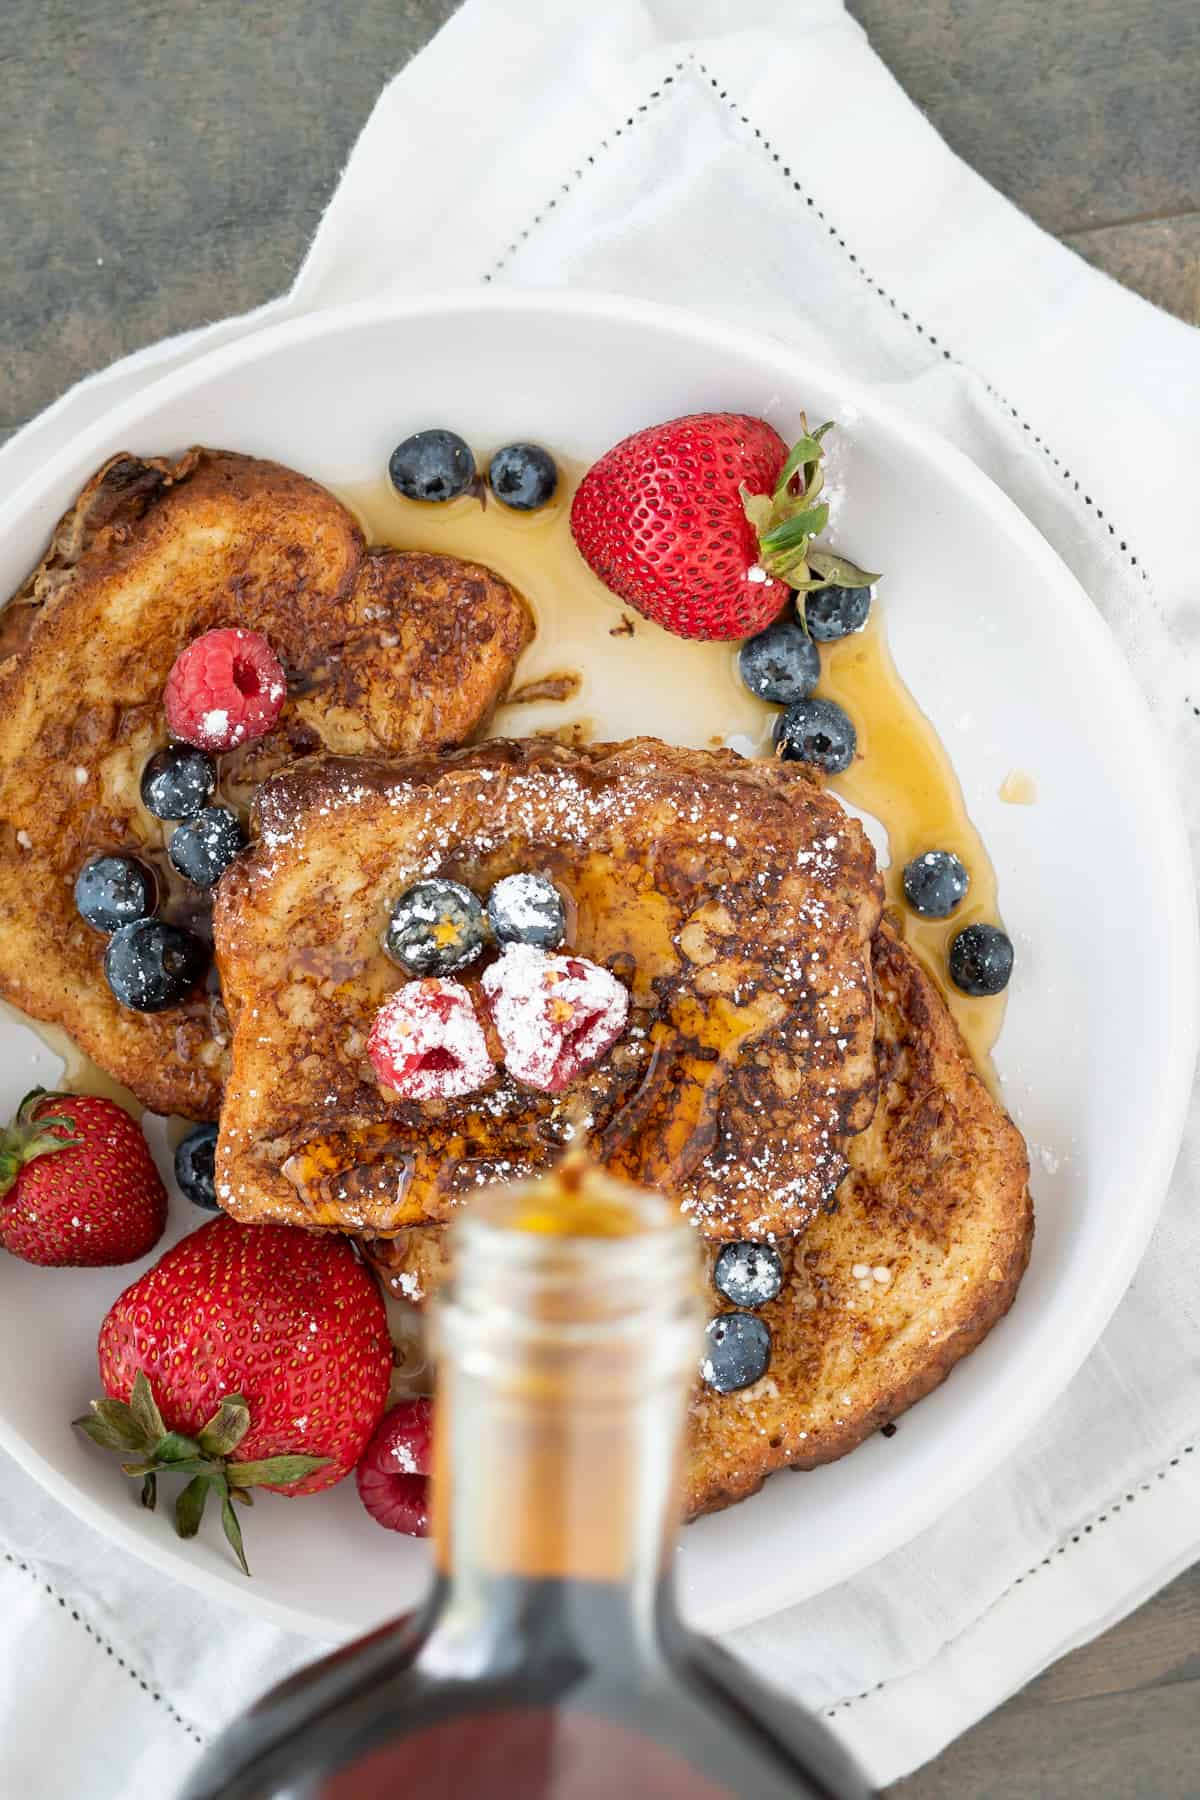 Overhead view of pouring maple syrup over slices of dairy-free french toast with berries and powdered sugar.